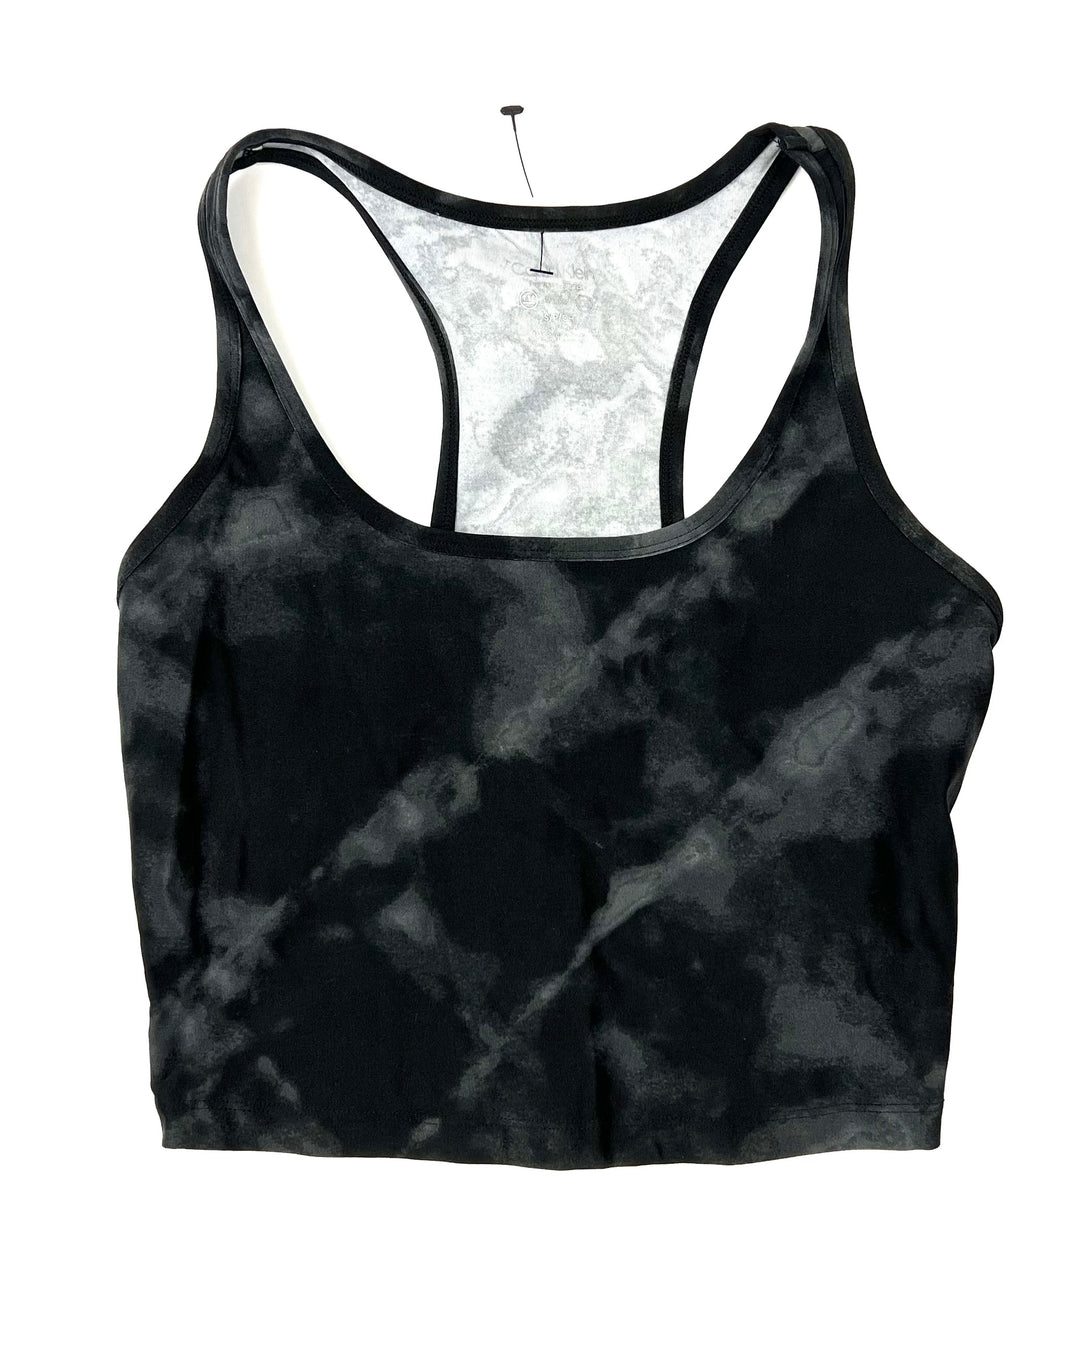 Black and Gray Marble Print Top - Small